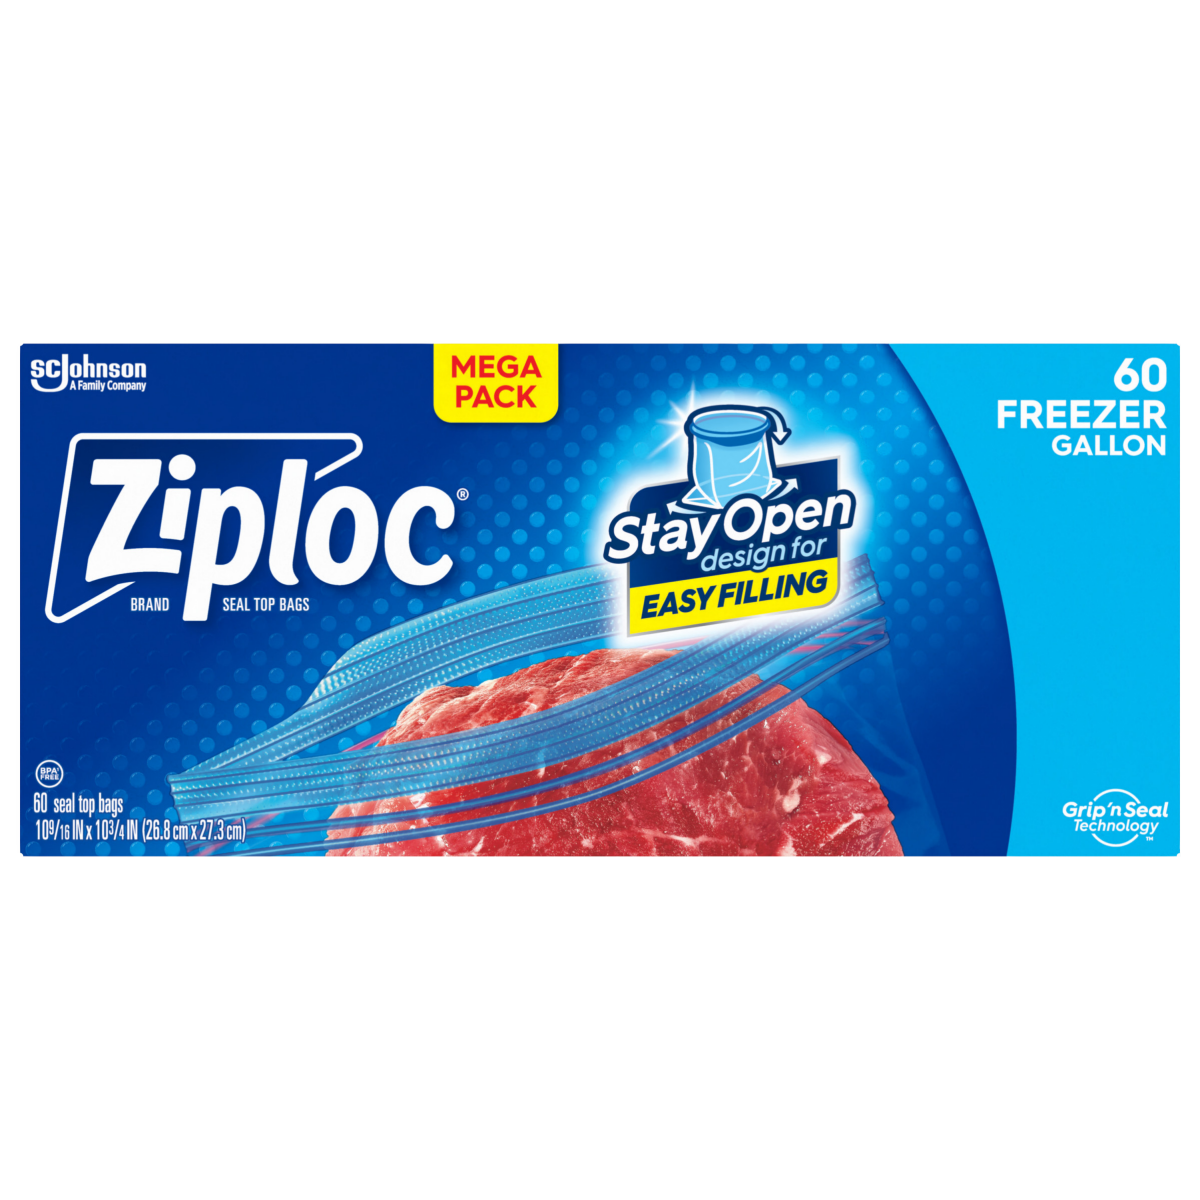 slide 1 of 10, Ziploc Brand Freezer Bags with New Stay Open Design, Gallon, 60, Patented Stand-up Bottom, Easy to Fill Freezer Bag, Unloc a Free Set of Hands in the Kitchen, Microwave Safe, BPA Free, 60 ct